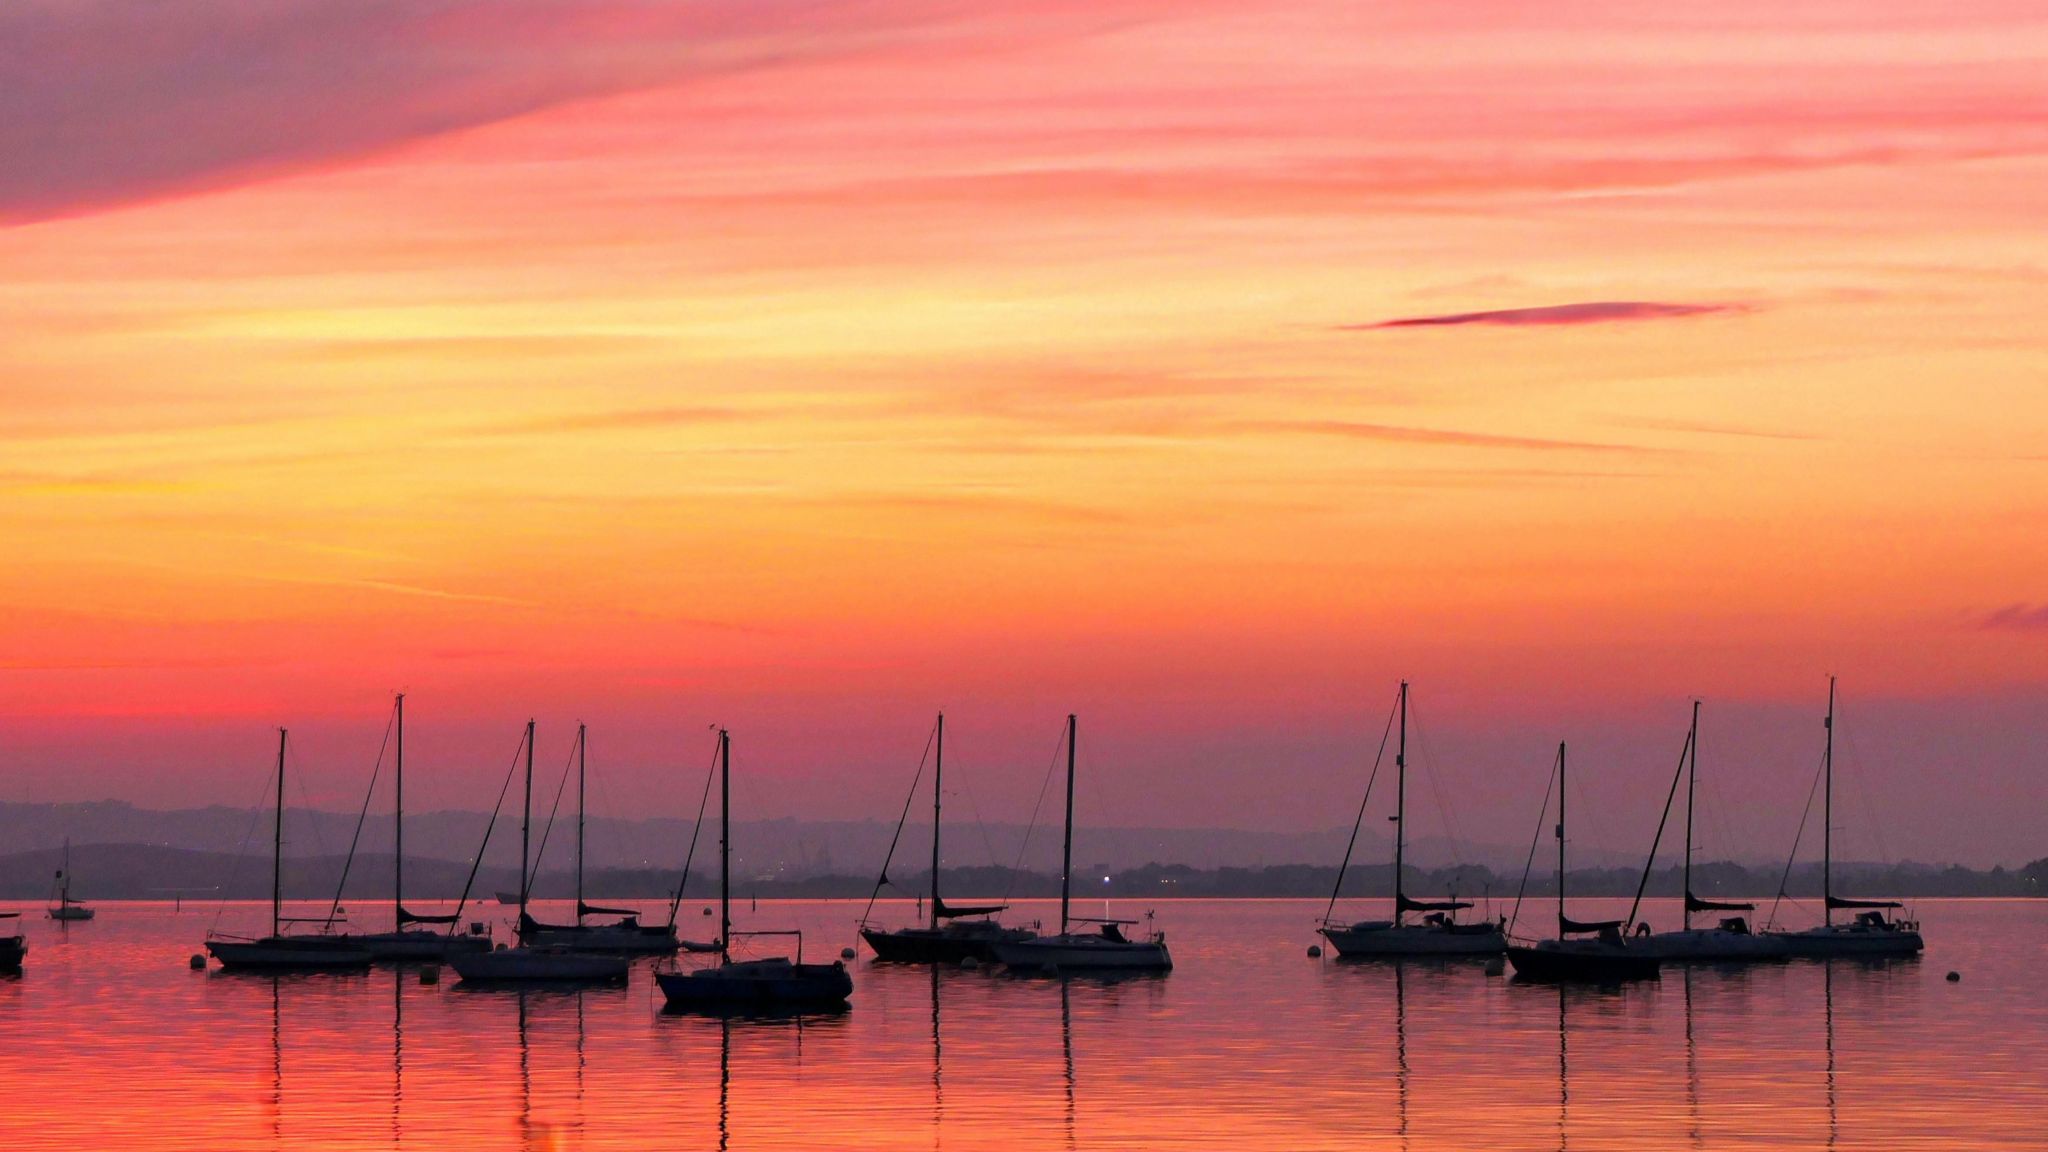 A view looking out to the sea from Gosport with eight boats silhouetted by a bright orange sunset 